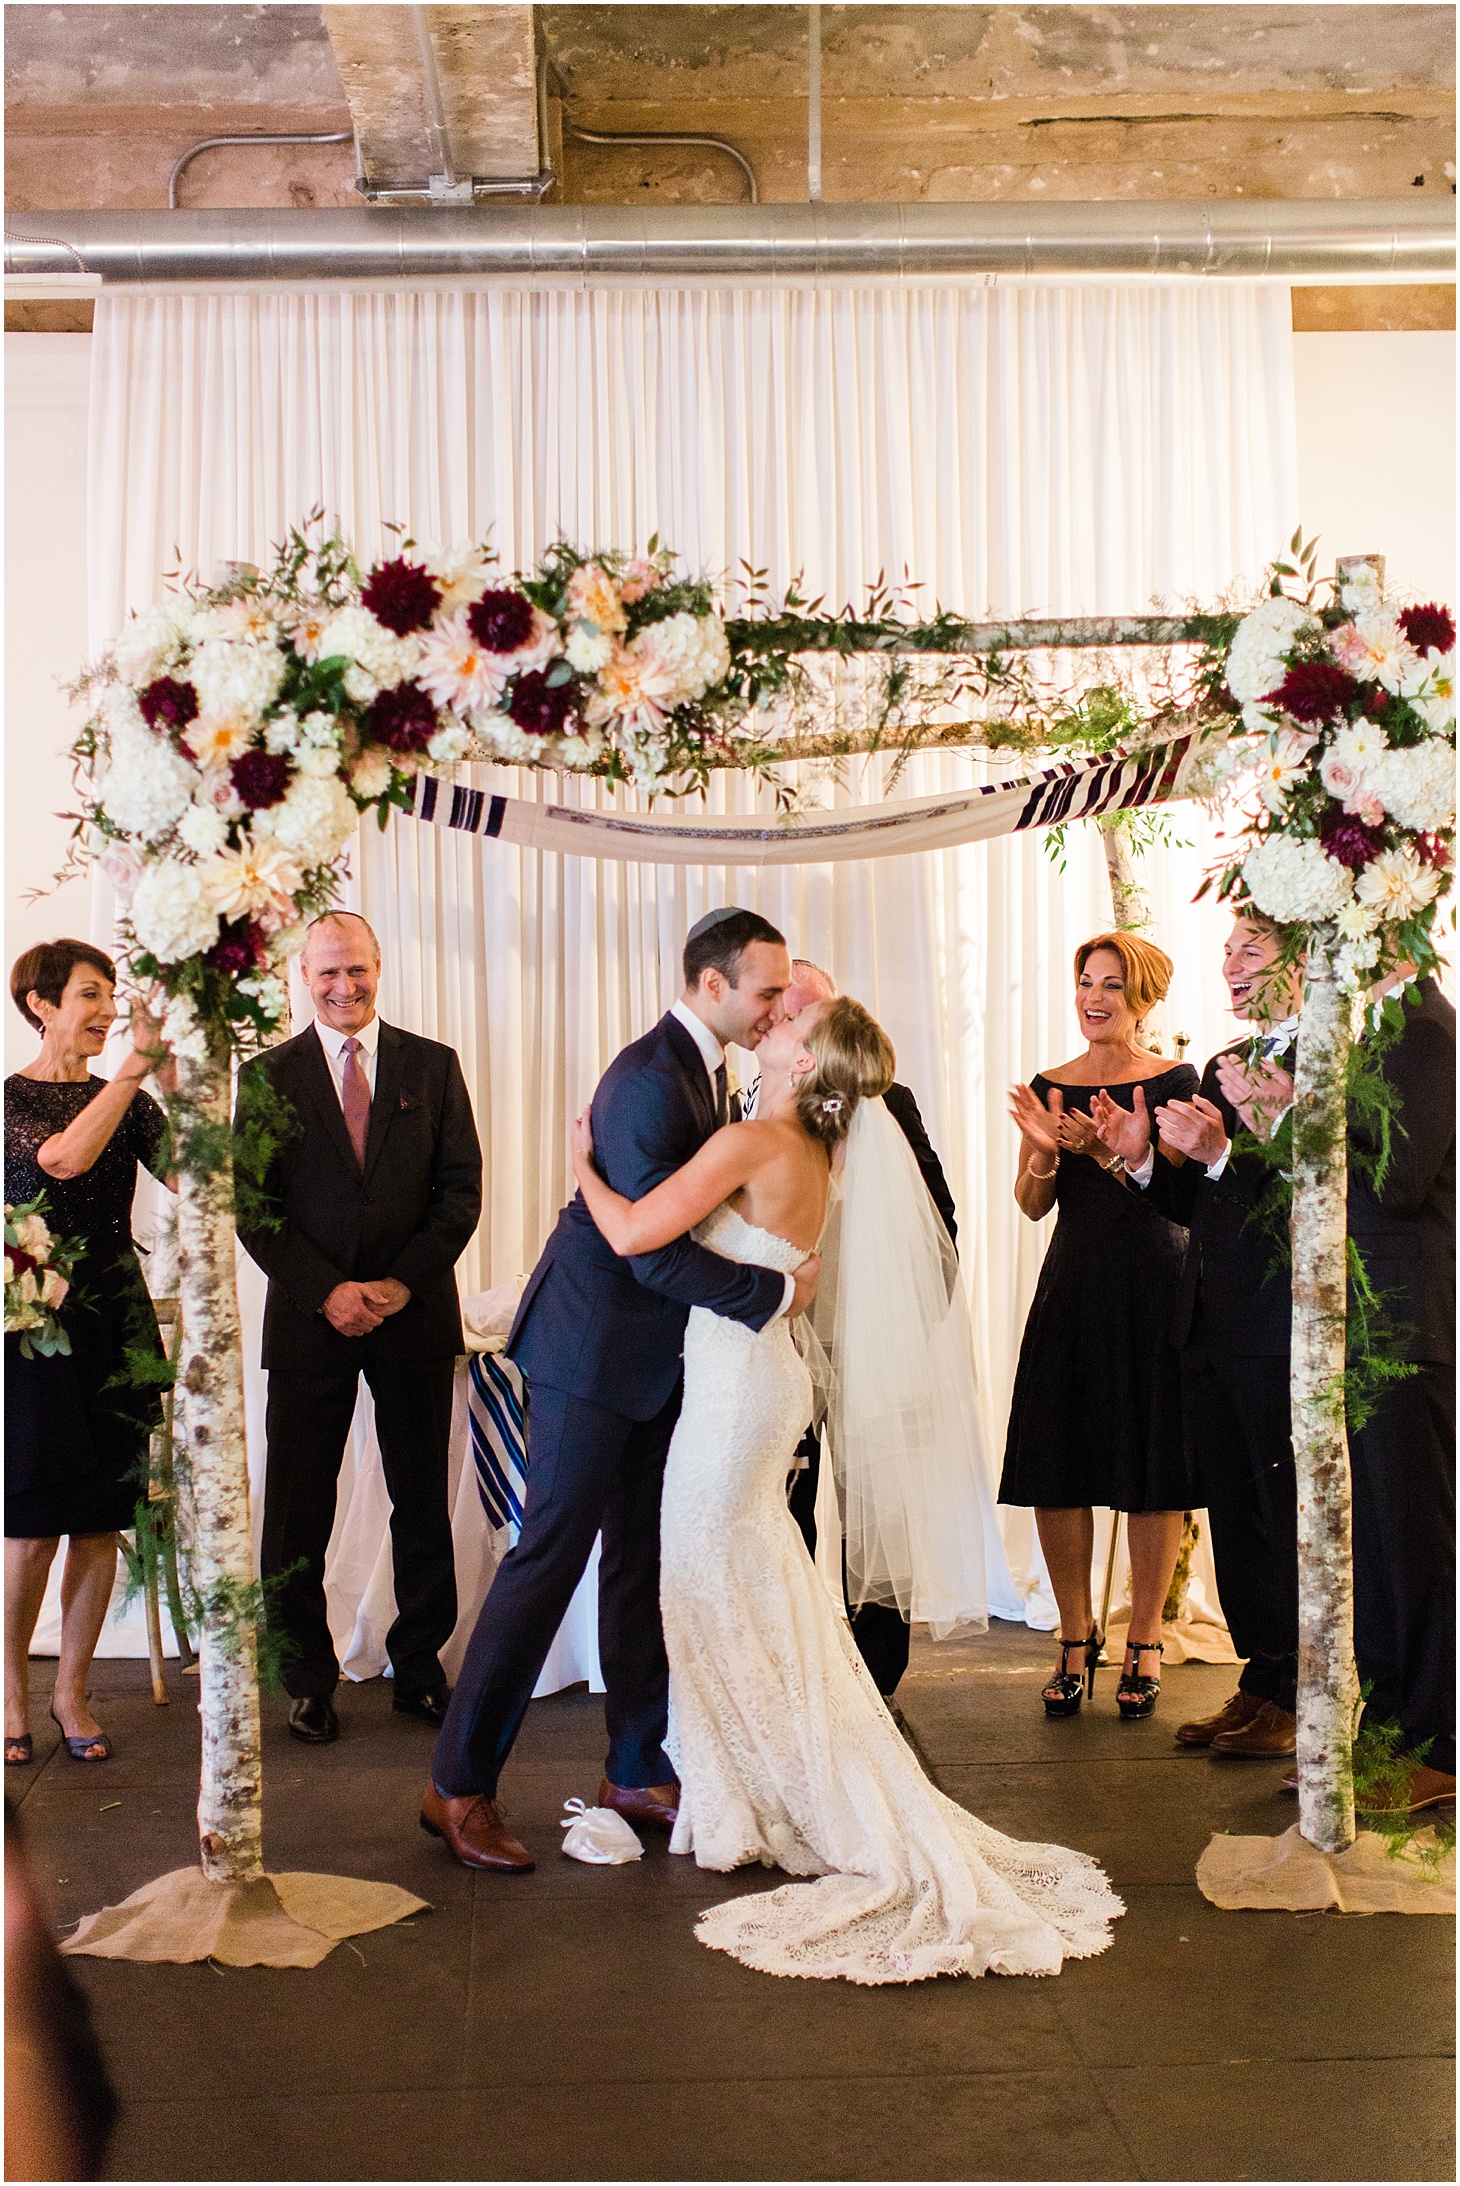 Jewish Wedding Ceremony at Long View Gallery, Industrial-Chic Wedding in DC, Sarah Bradshaw Photography, DC Wedding Photographer